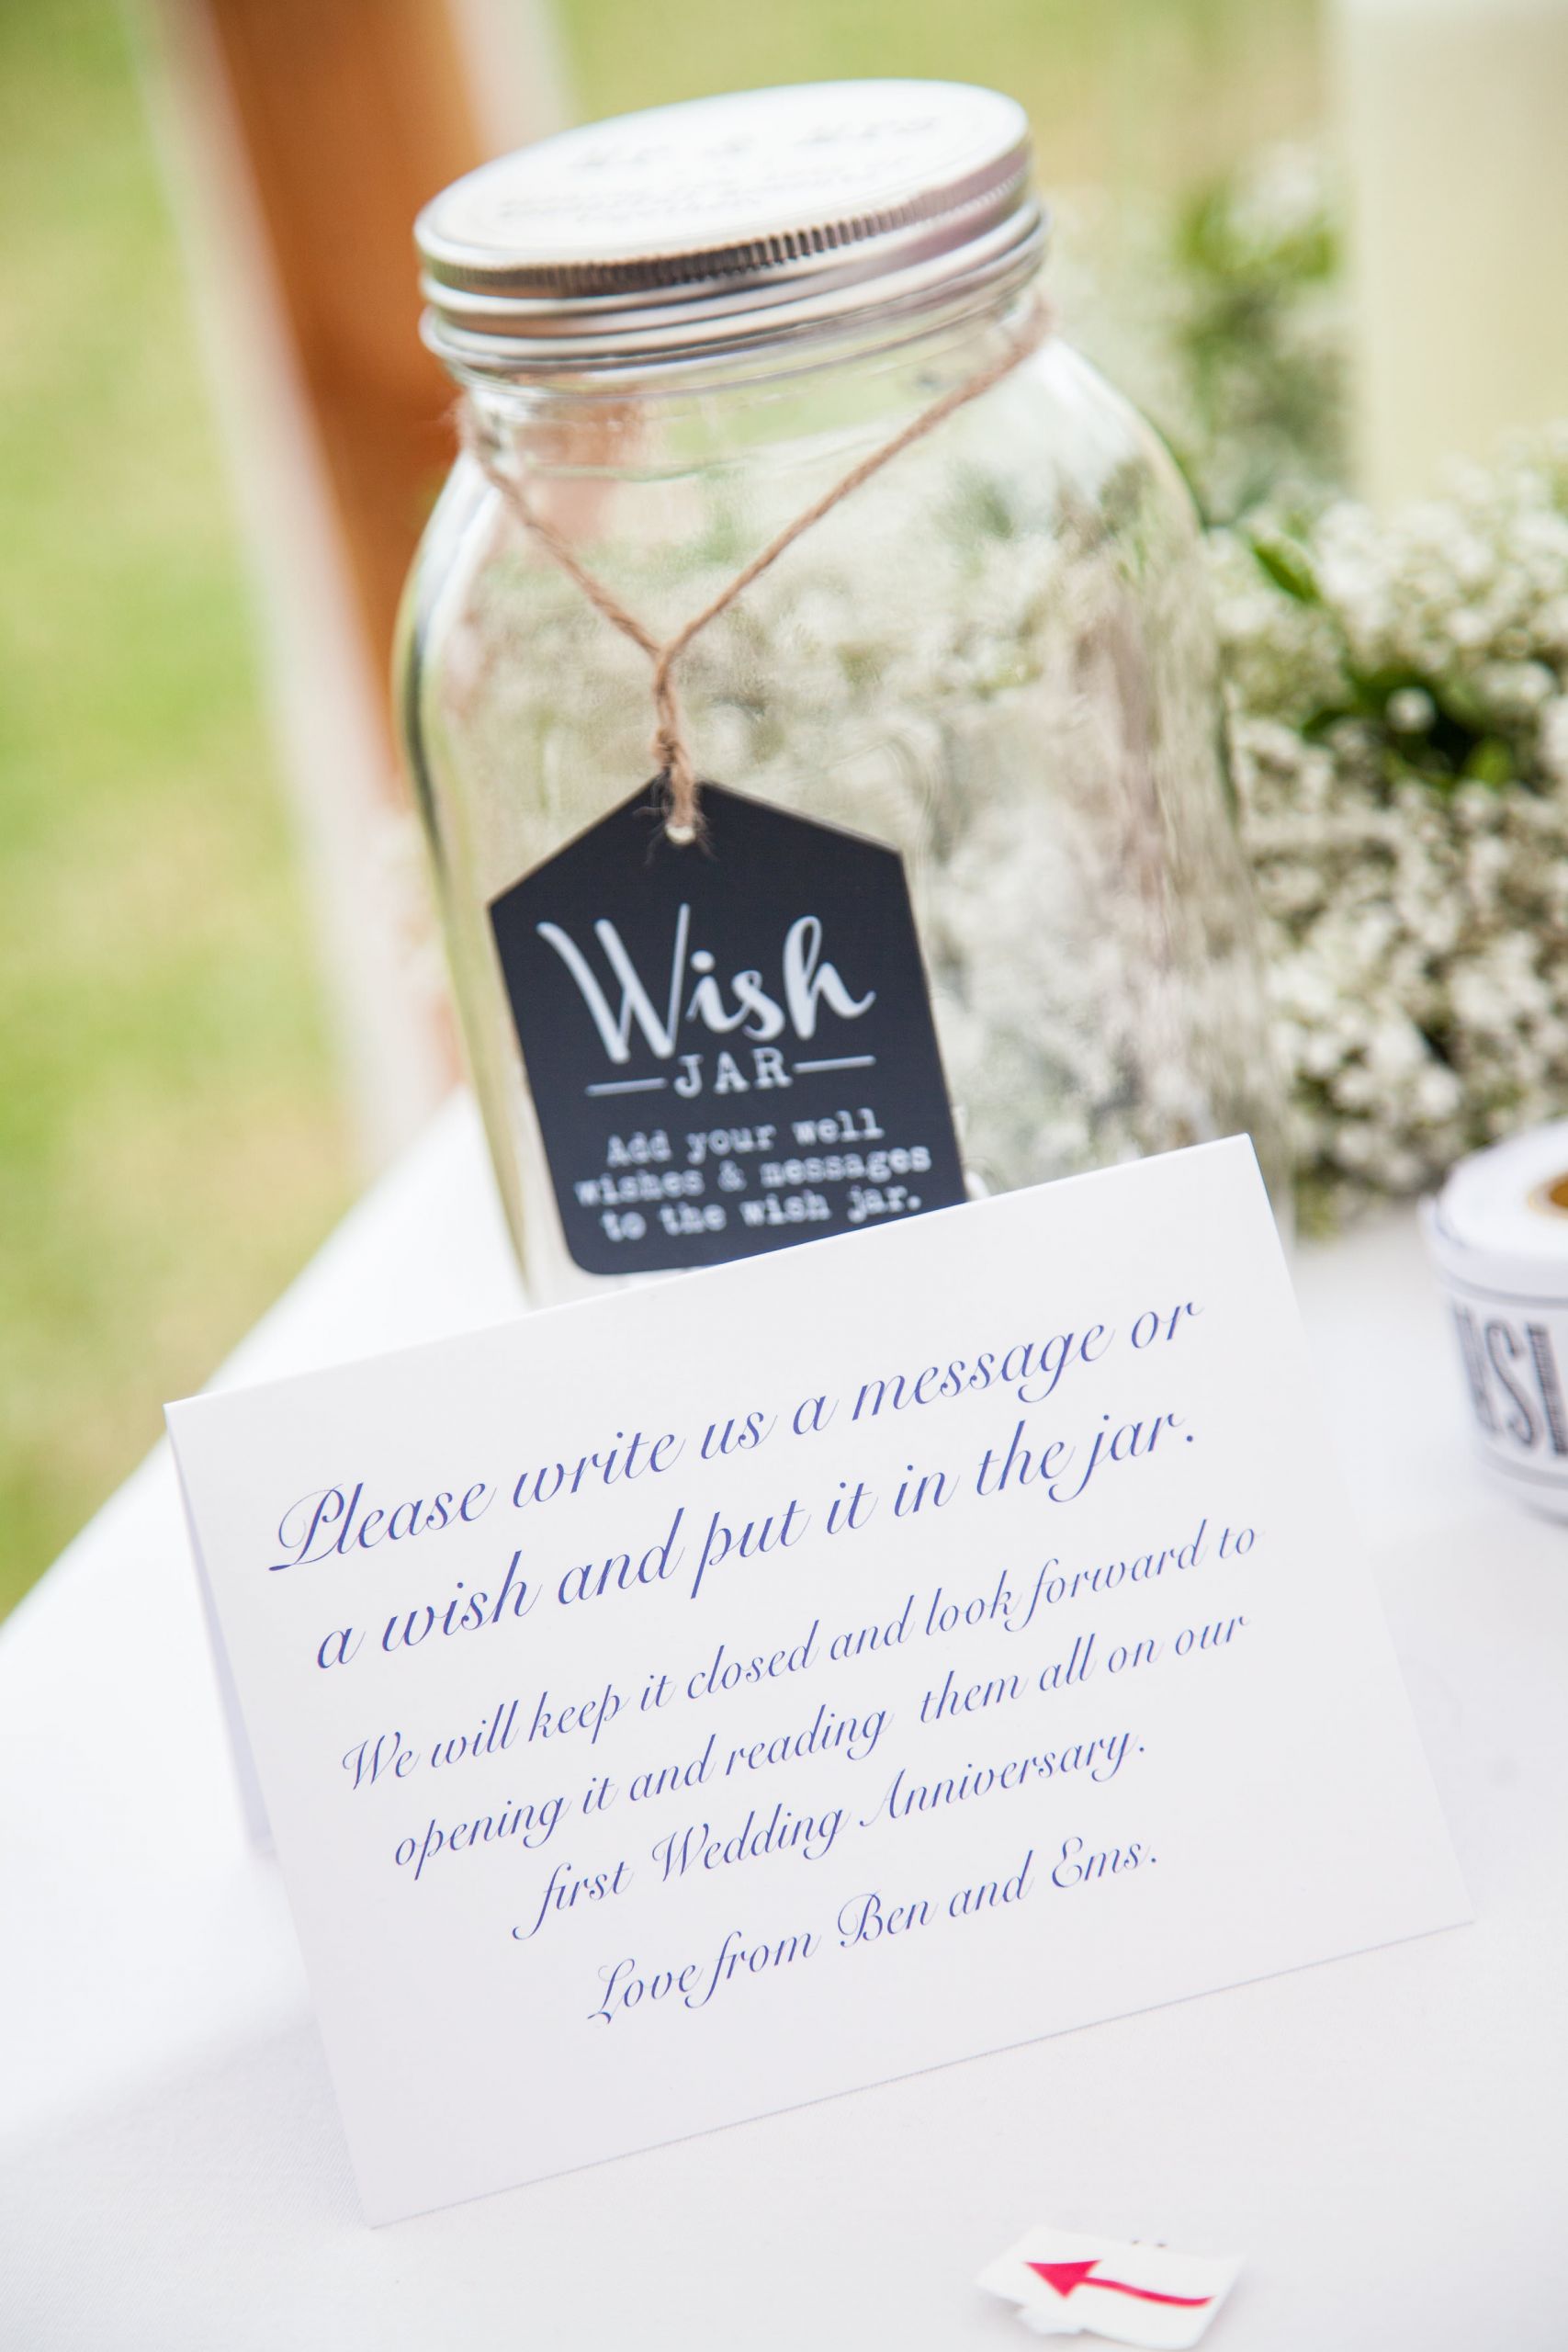 Wedding Guest Book Ideas Uk
 Alternative Guest Book Ideas for Your Wedding Day